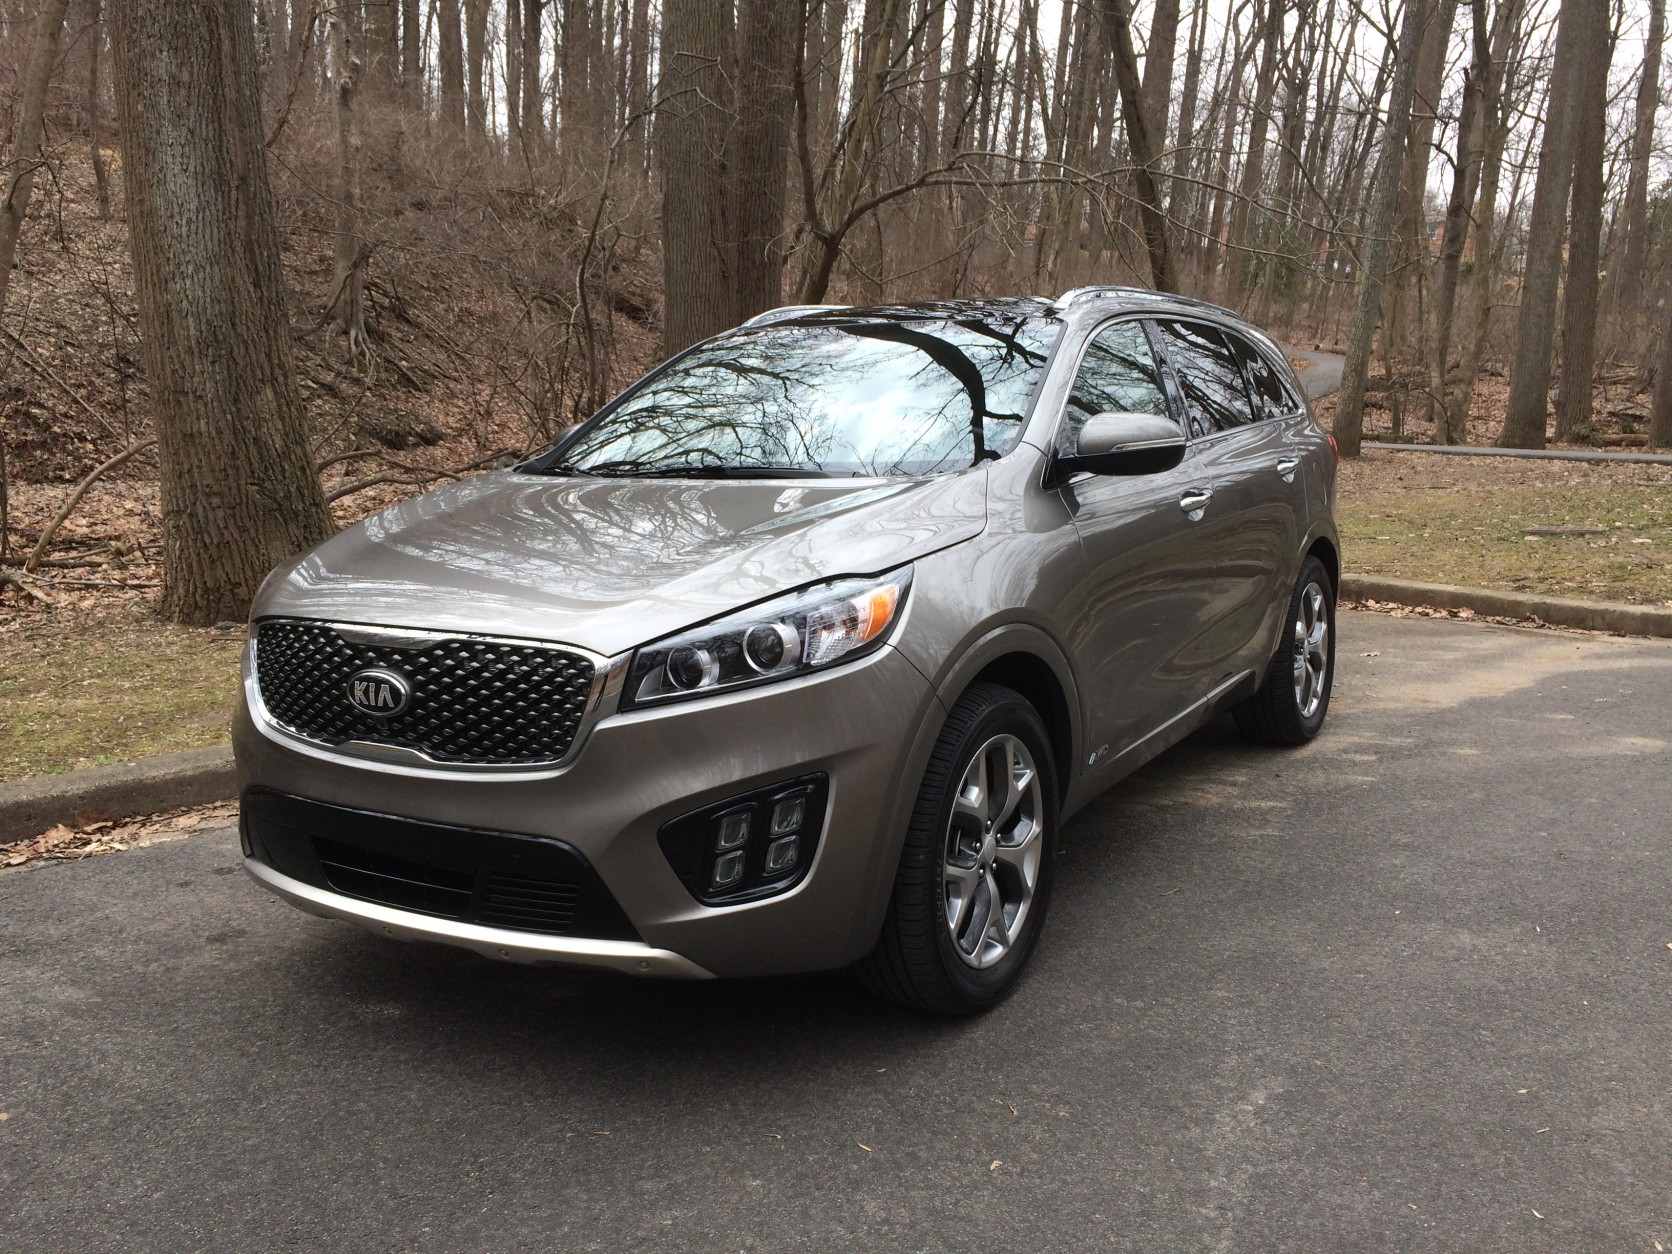 The 2016 Kia Sorento is a step forward for the vehicle, WTOP's Mike Parris says. (WTOP/Mike Parris)